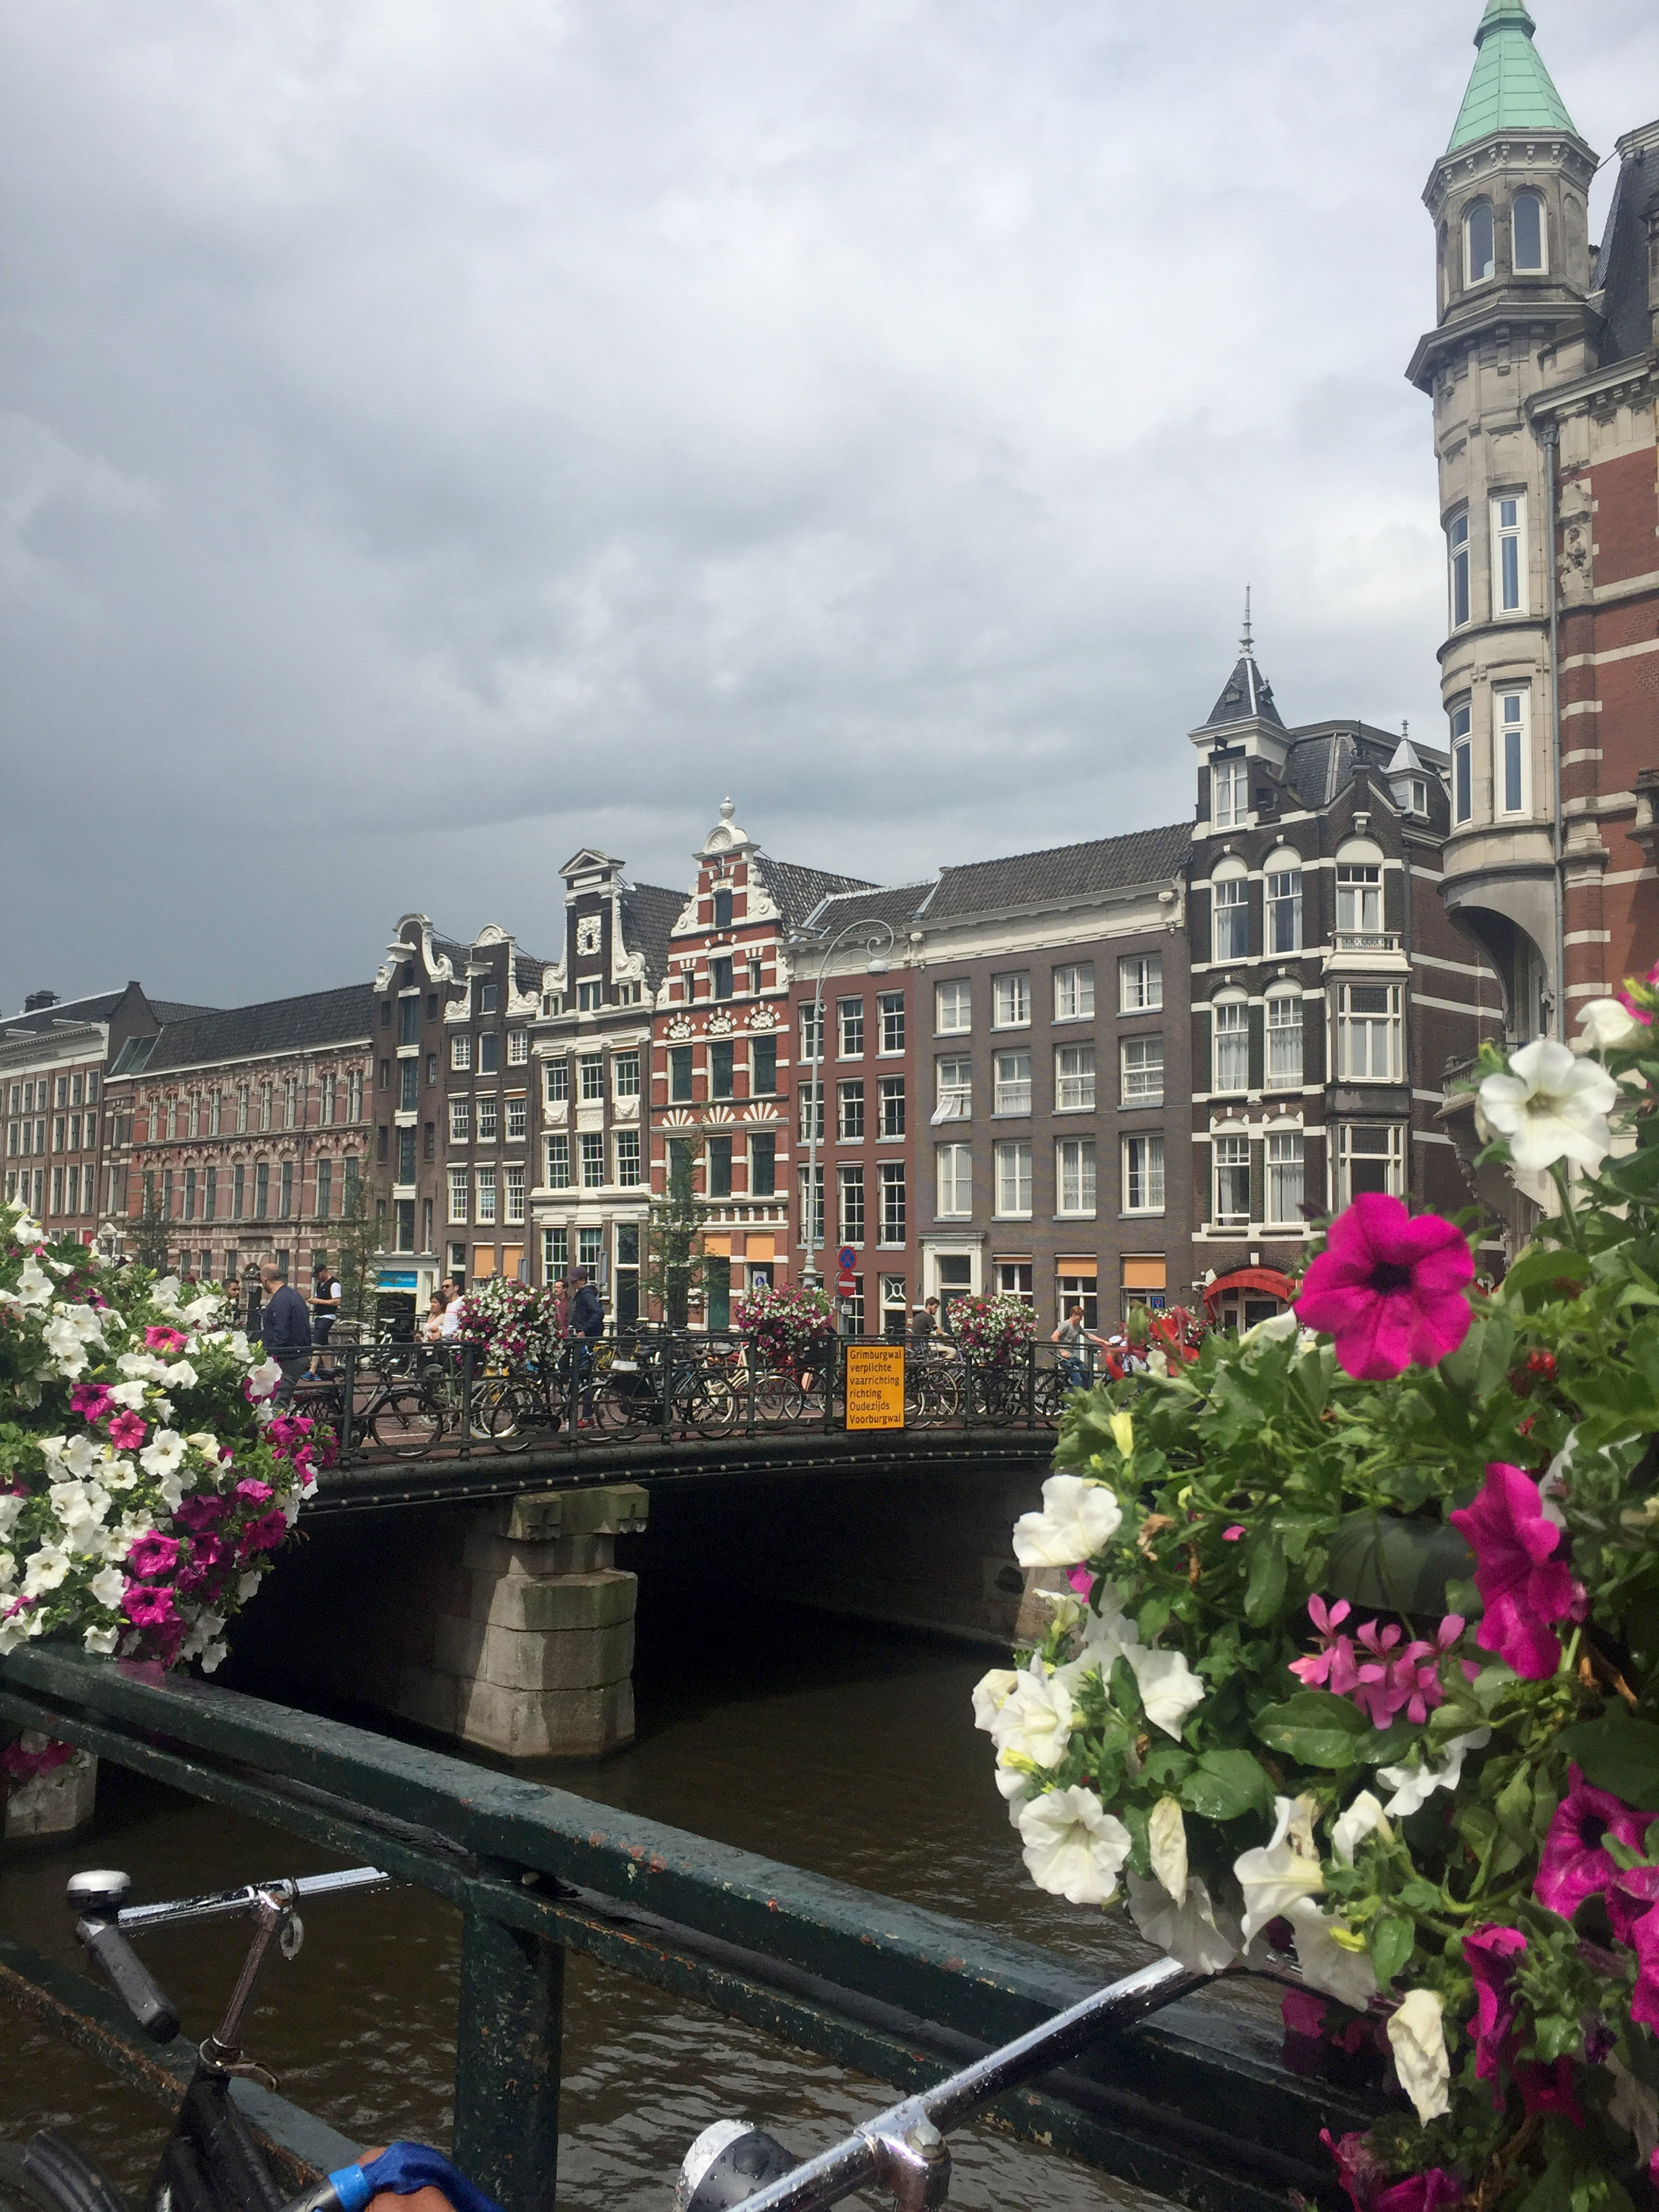  We flew into Amsterdam and spent our first day exploring the historic portion of the city. 